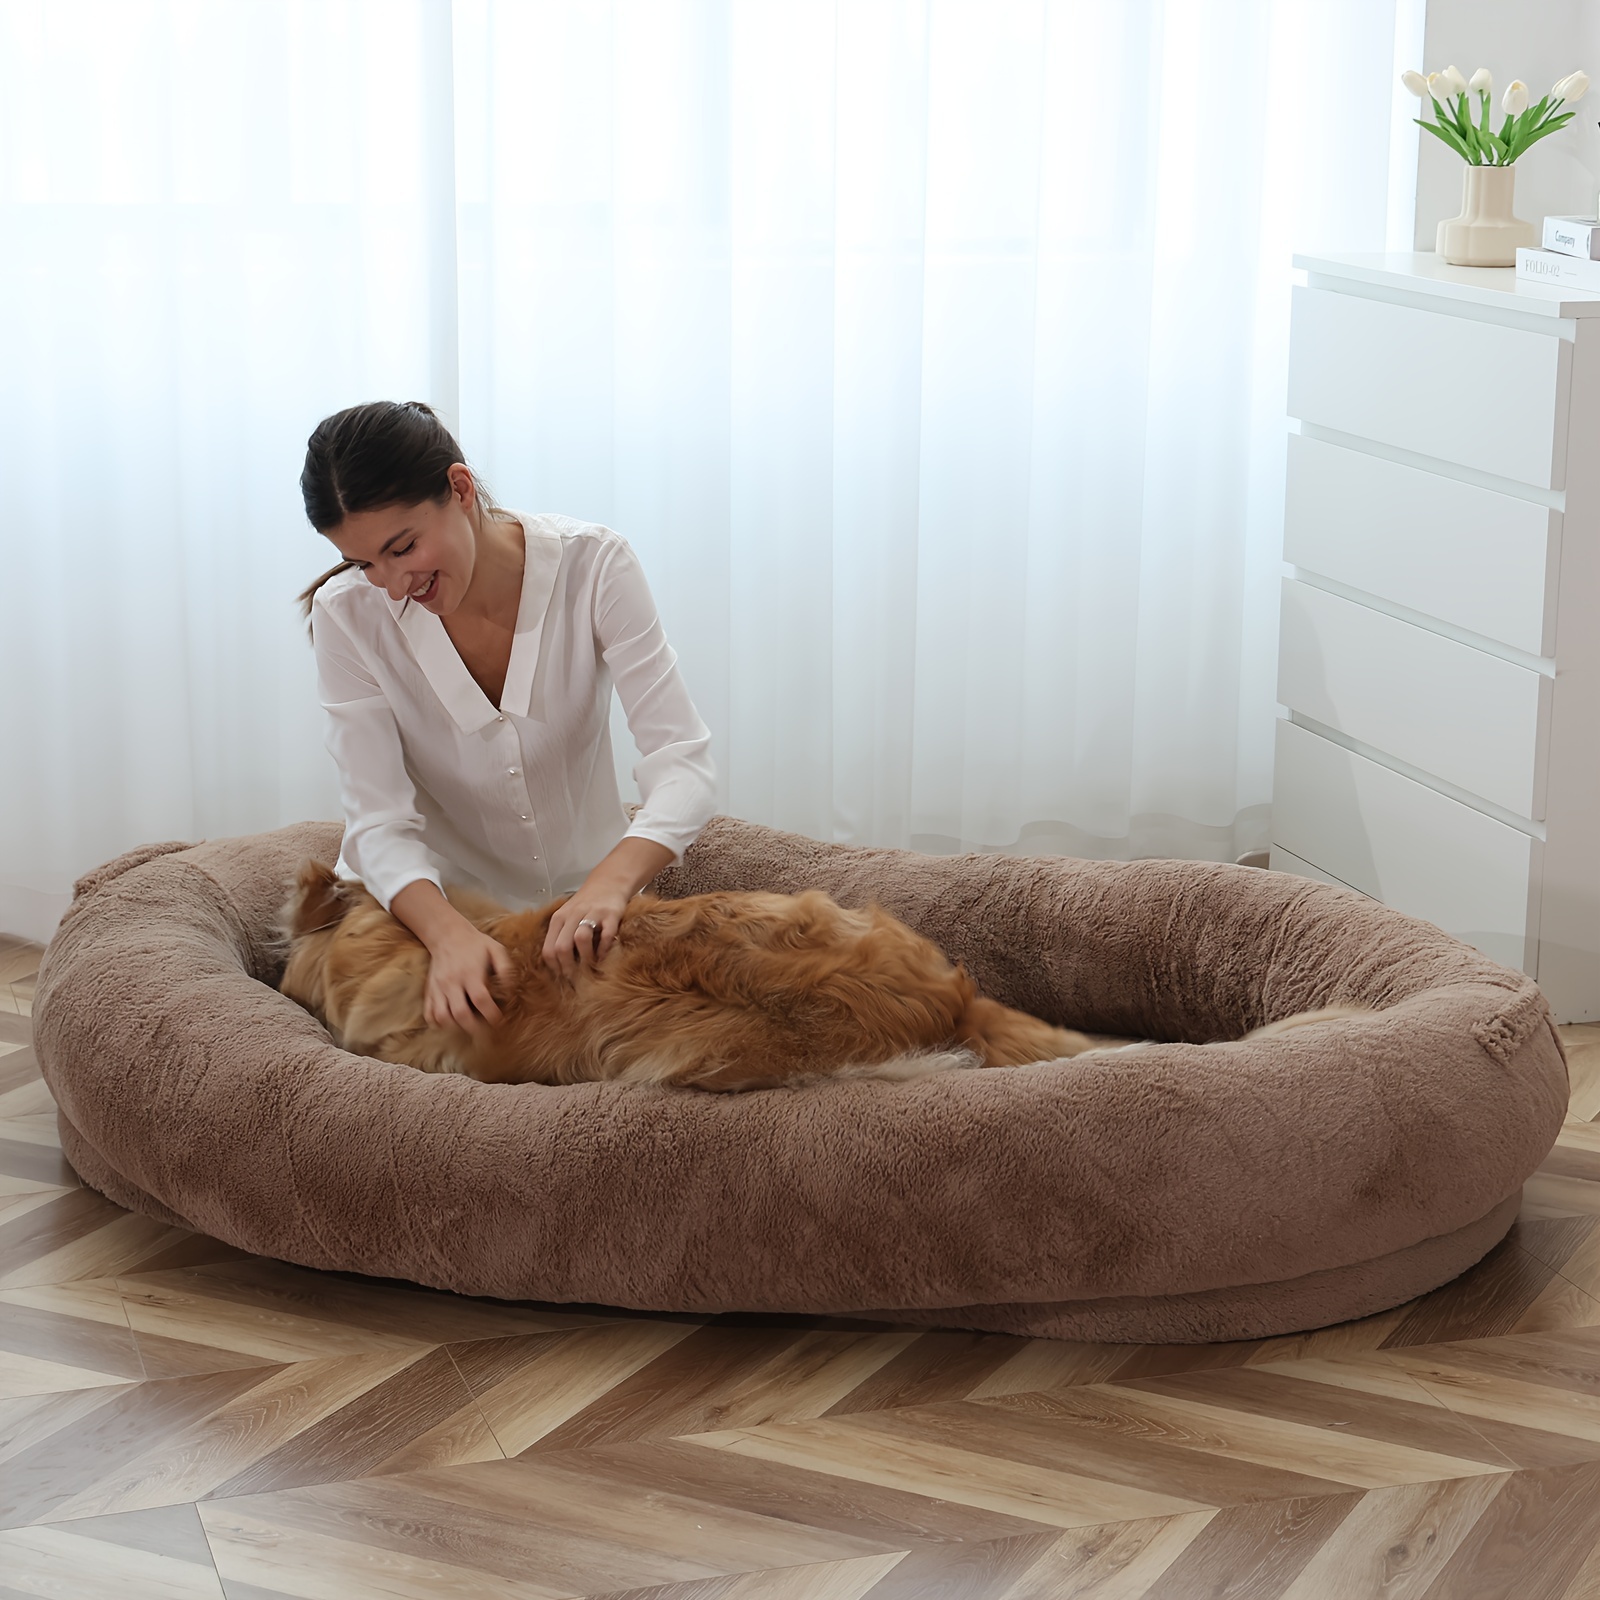 

Oversized Bed, 71"x47.2"x12" Giant Dog Bed For Adults And Pets, Washable Large Bean Bag Bed For Humans, Khaki